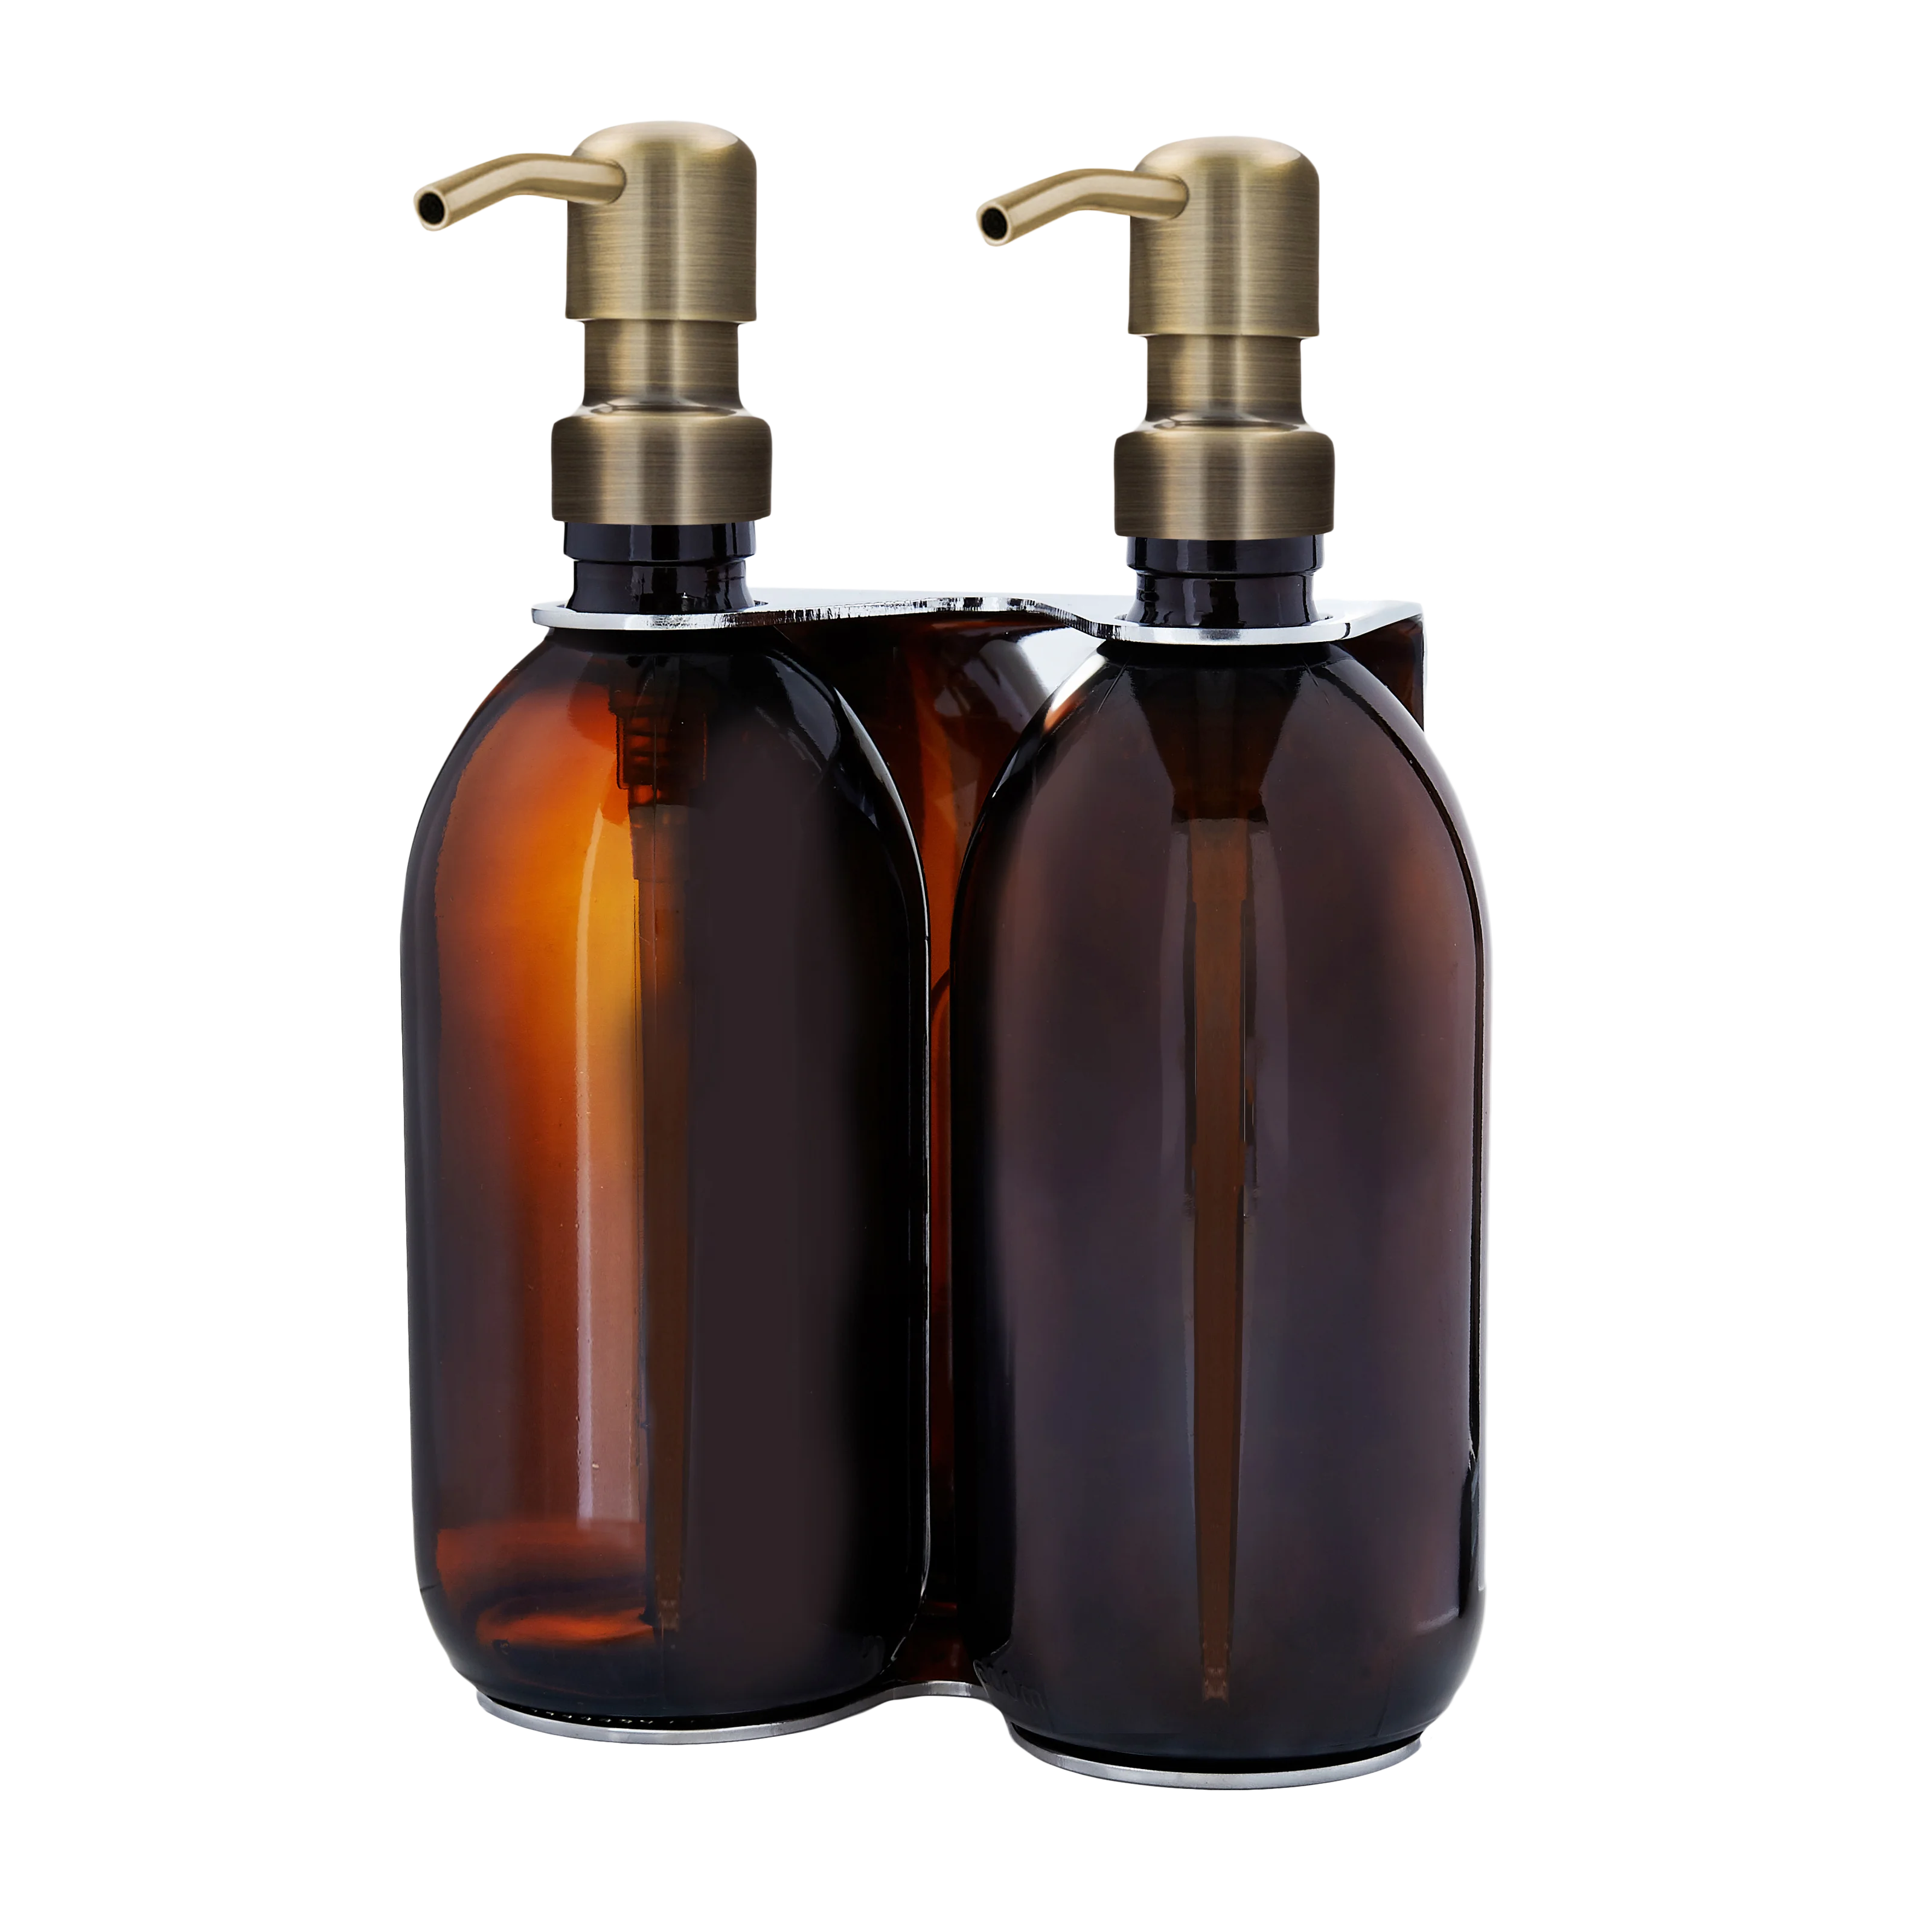 Chrome Double Wall Mounted Dispenser 250ml amber dispensers with Gold Pumps